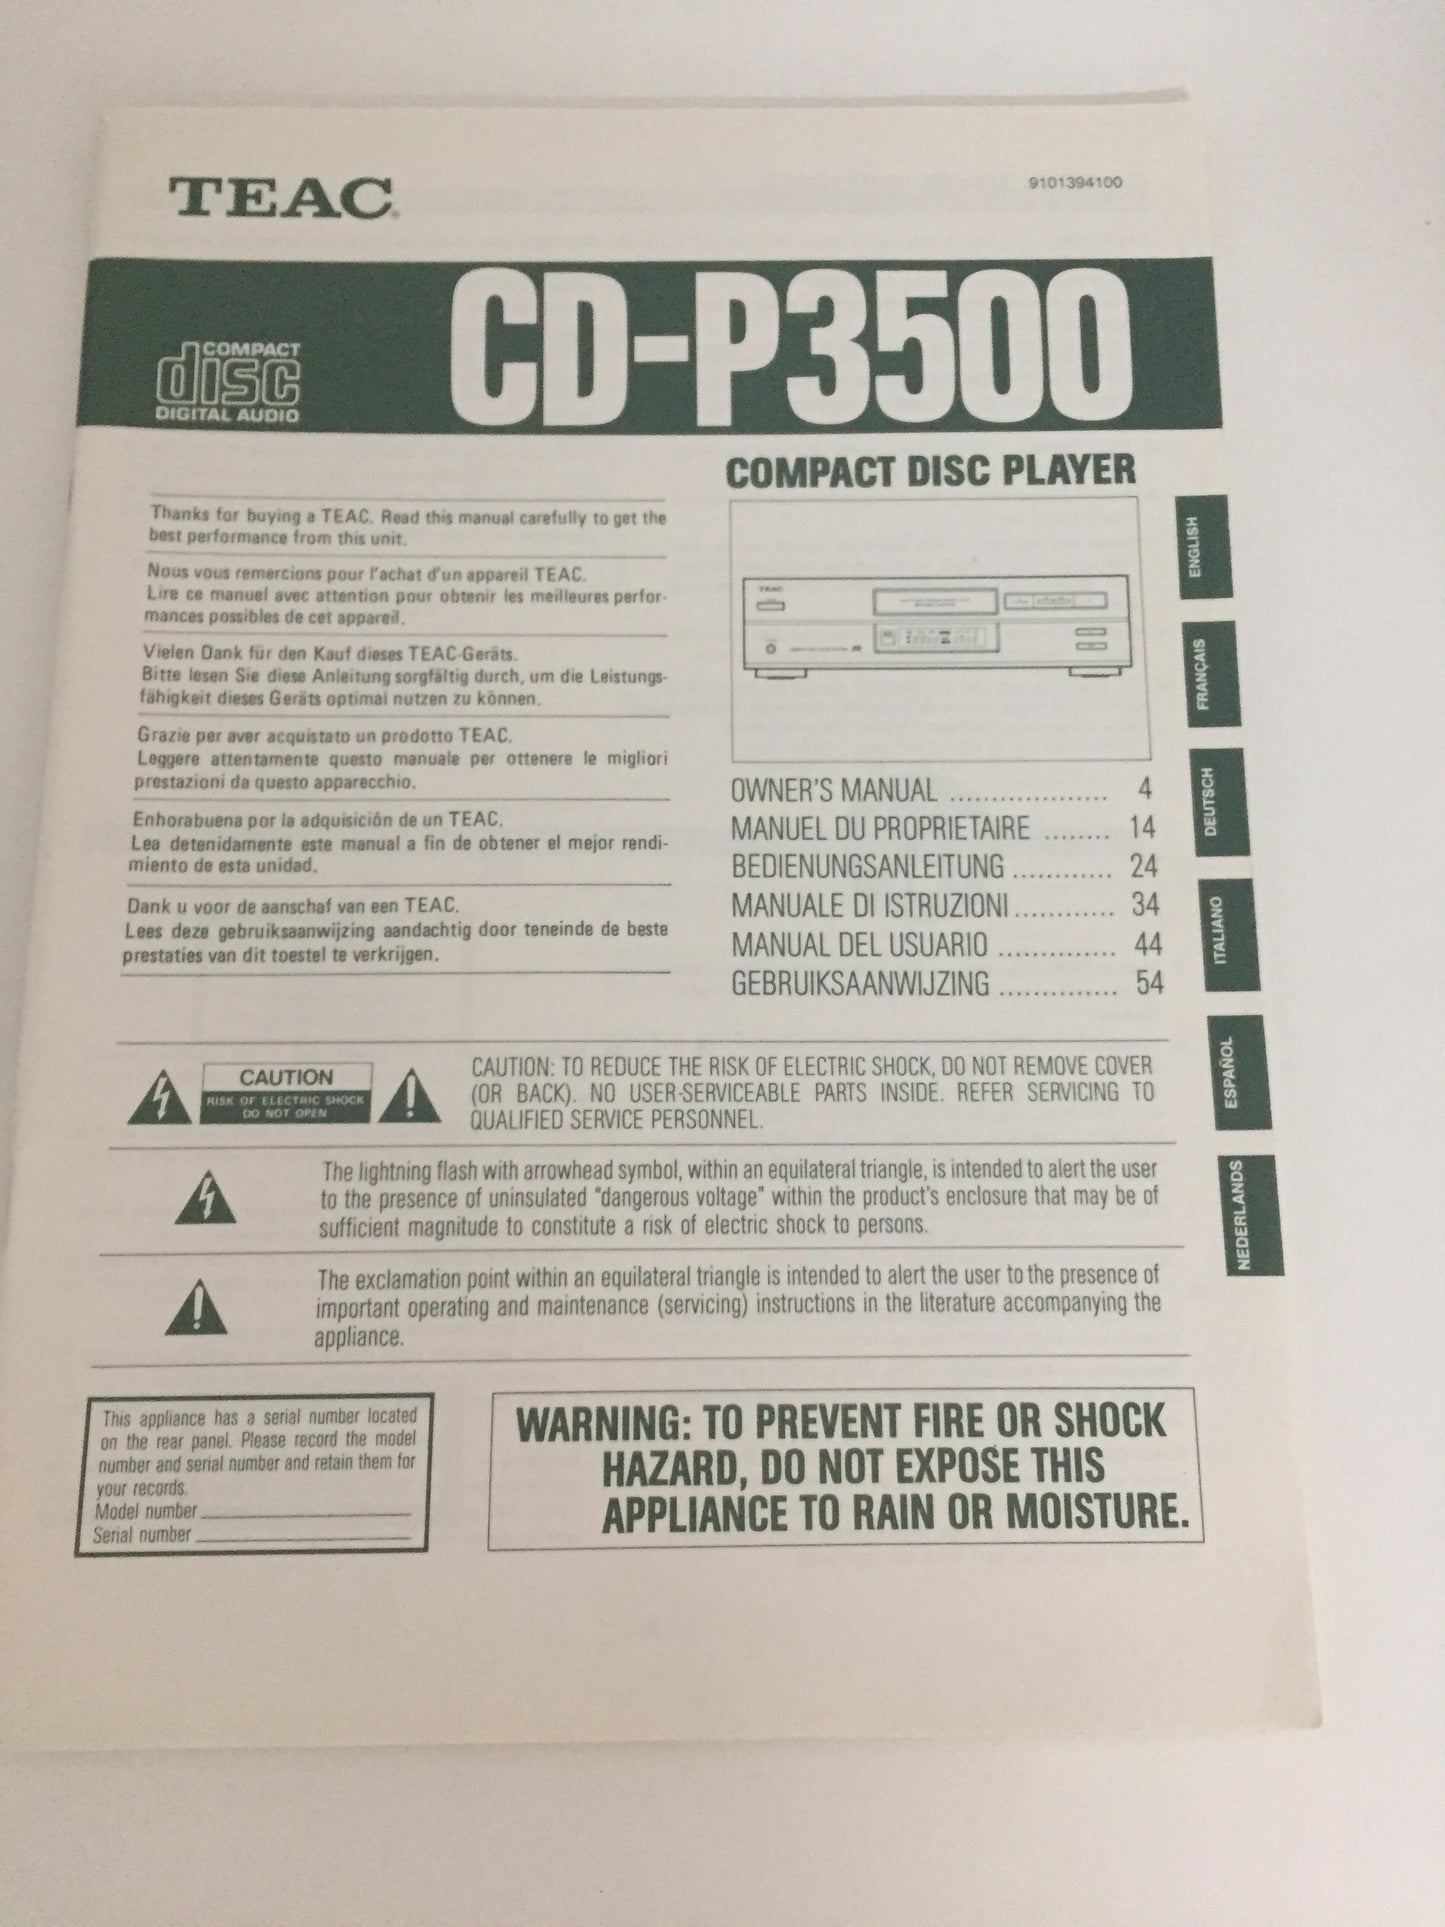 Teac CD-P3500 Compact Disc Player Owner's Manual